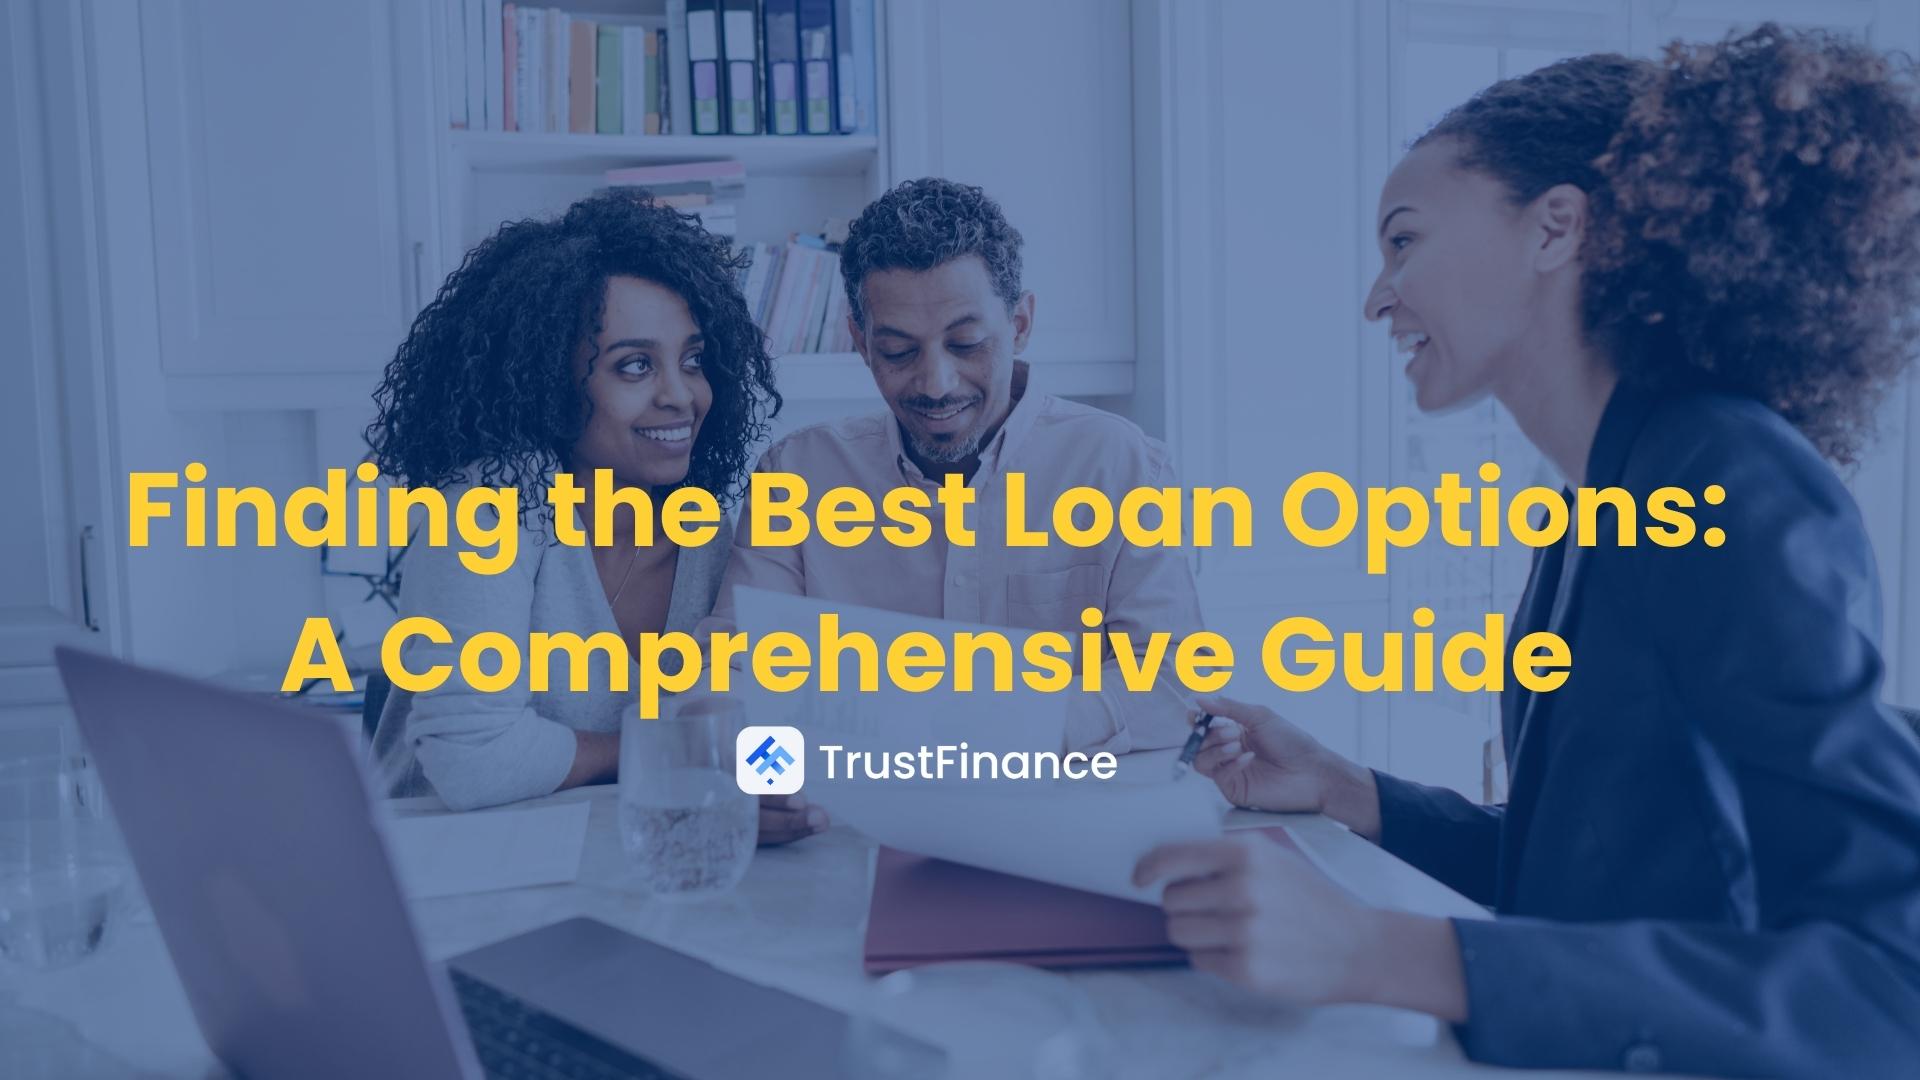 Finding the Best Loan Options